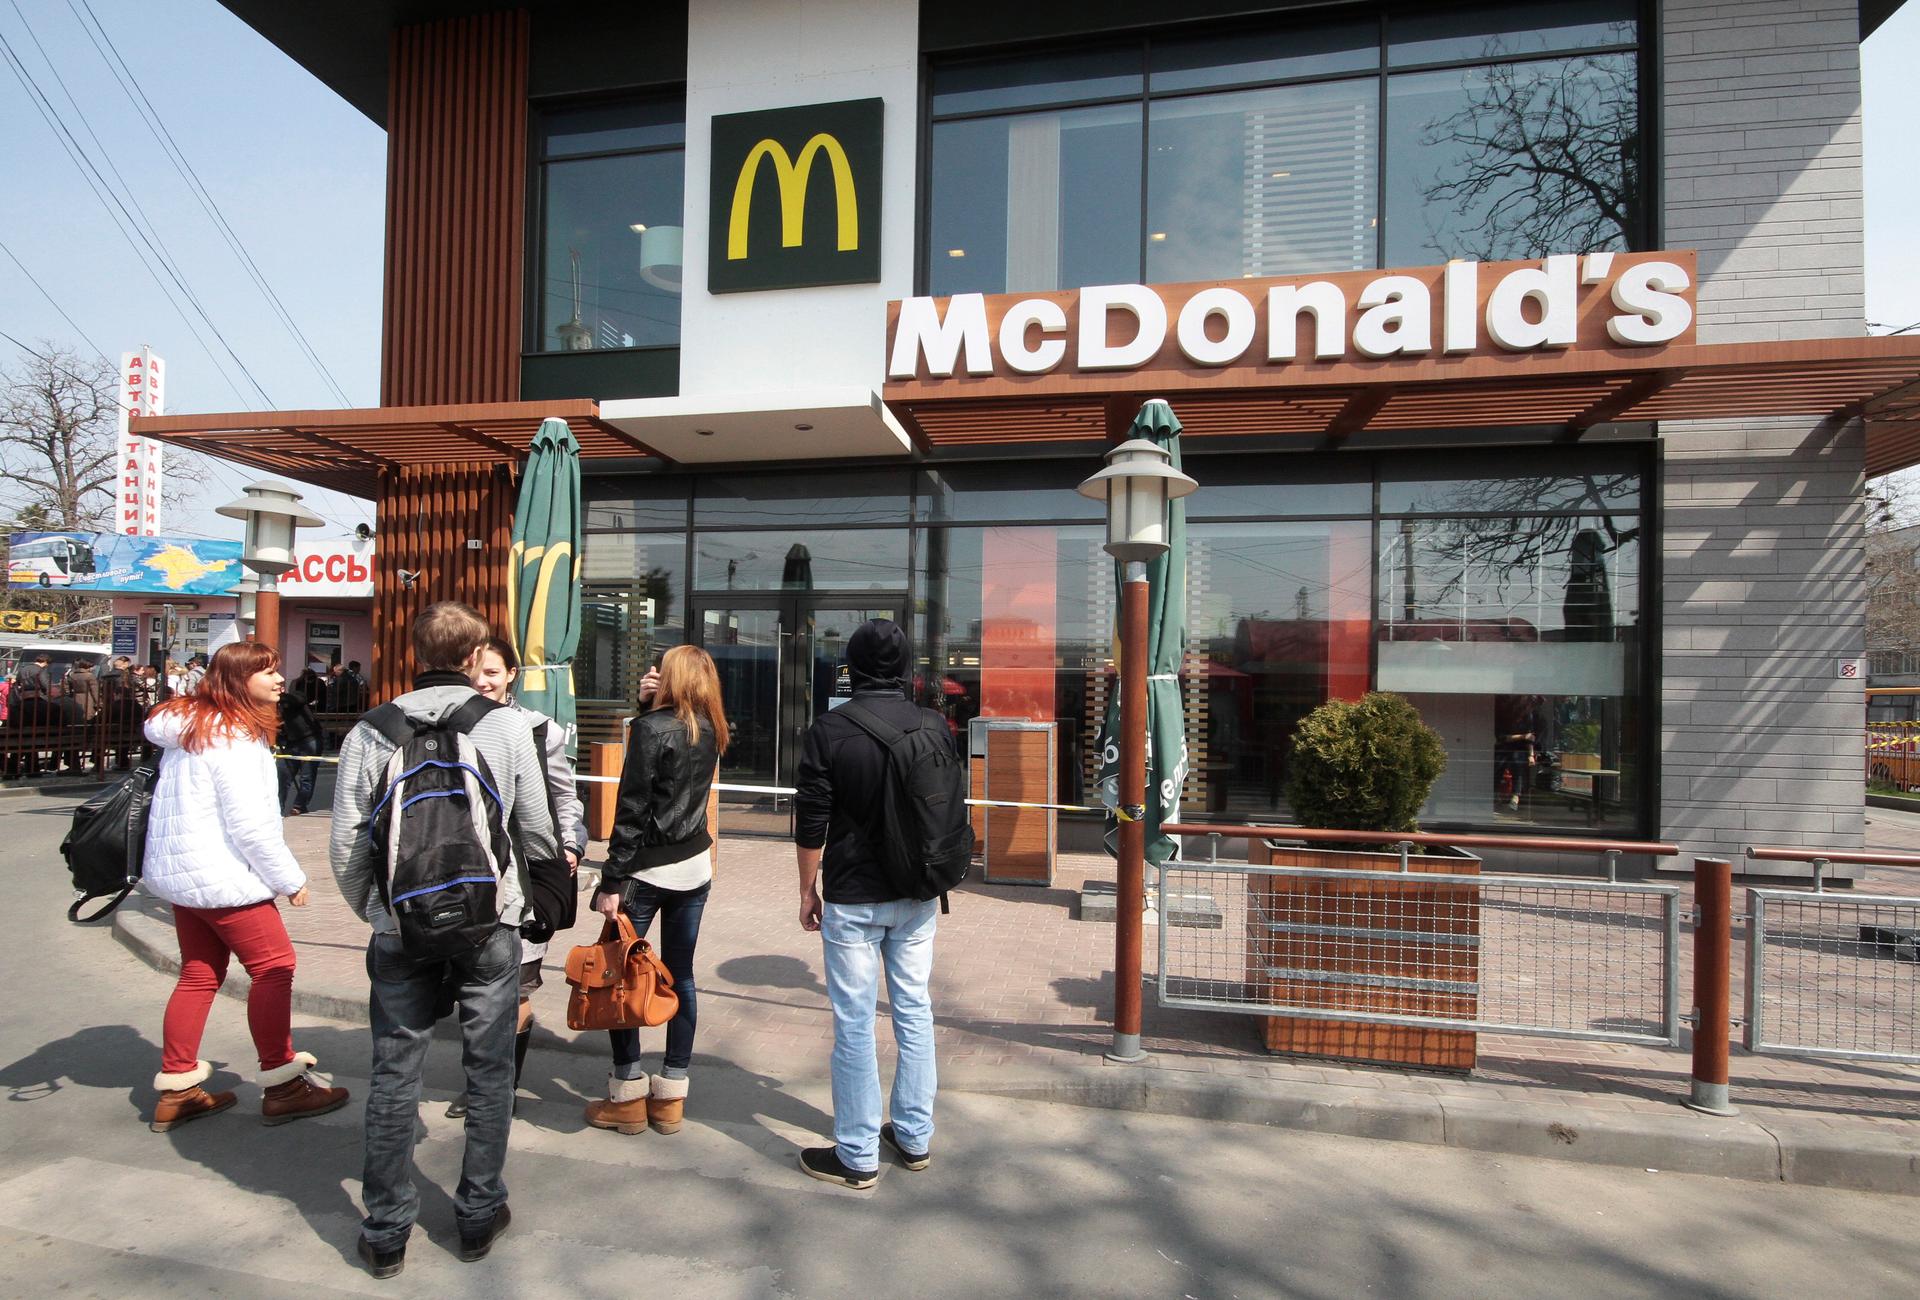 People gather outside a McDonald's restaurant, which was earlier closed for clients, in the Crimean city of Simferopol April 4, 2014. McDonald's has suspended work at its restaurants in Crimea for "manufacturing reasons", the U.S. fast food chain said on